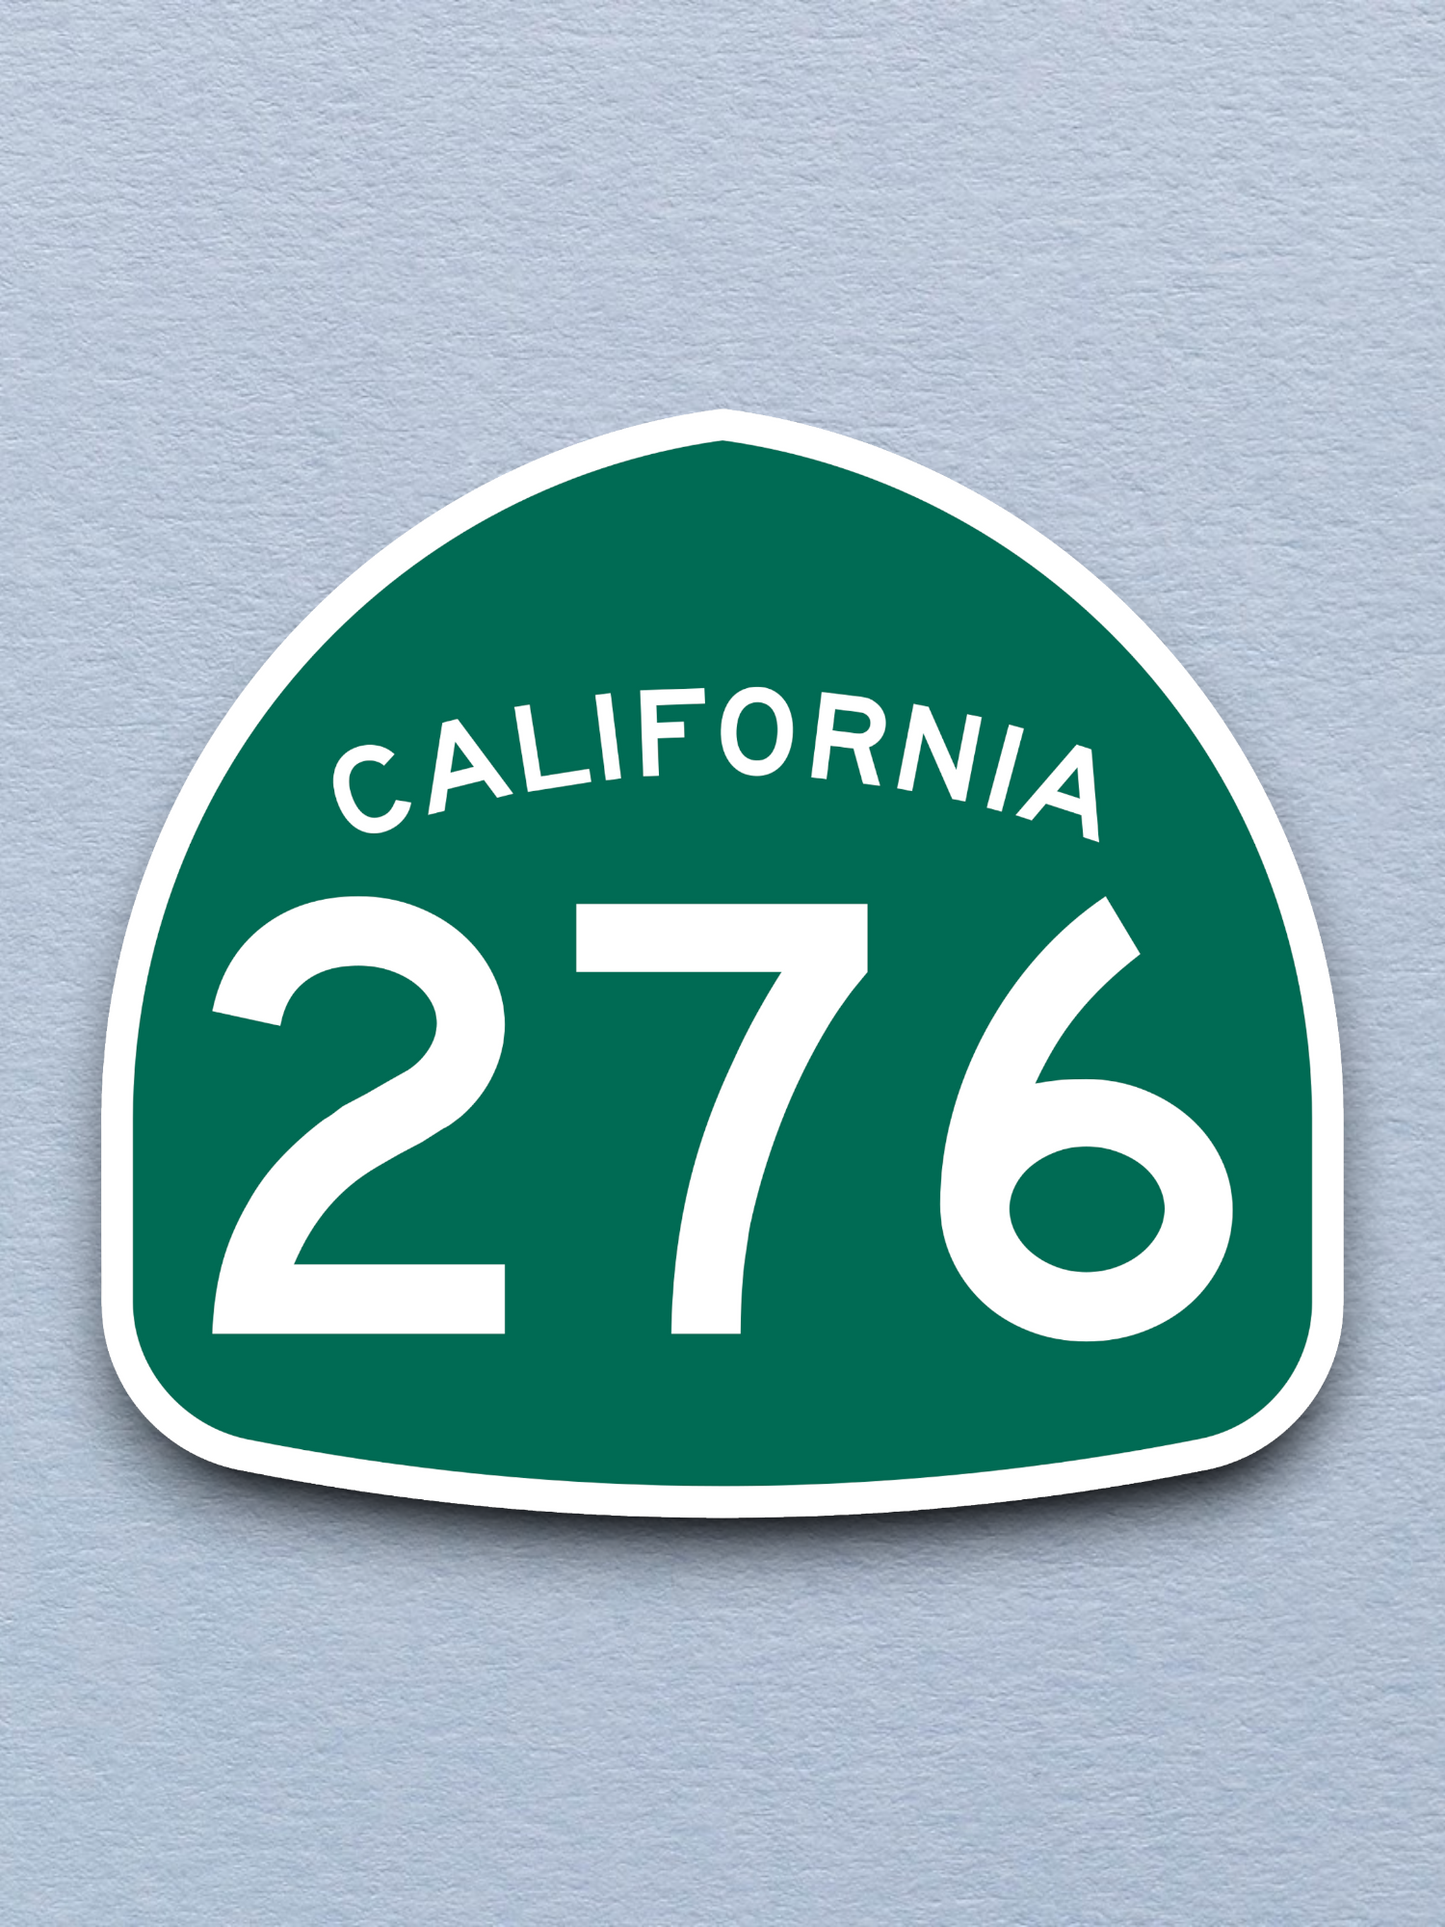 California State Route 276 Road Sign Sticker